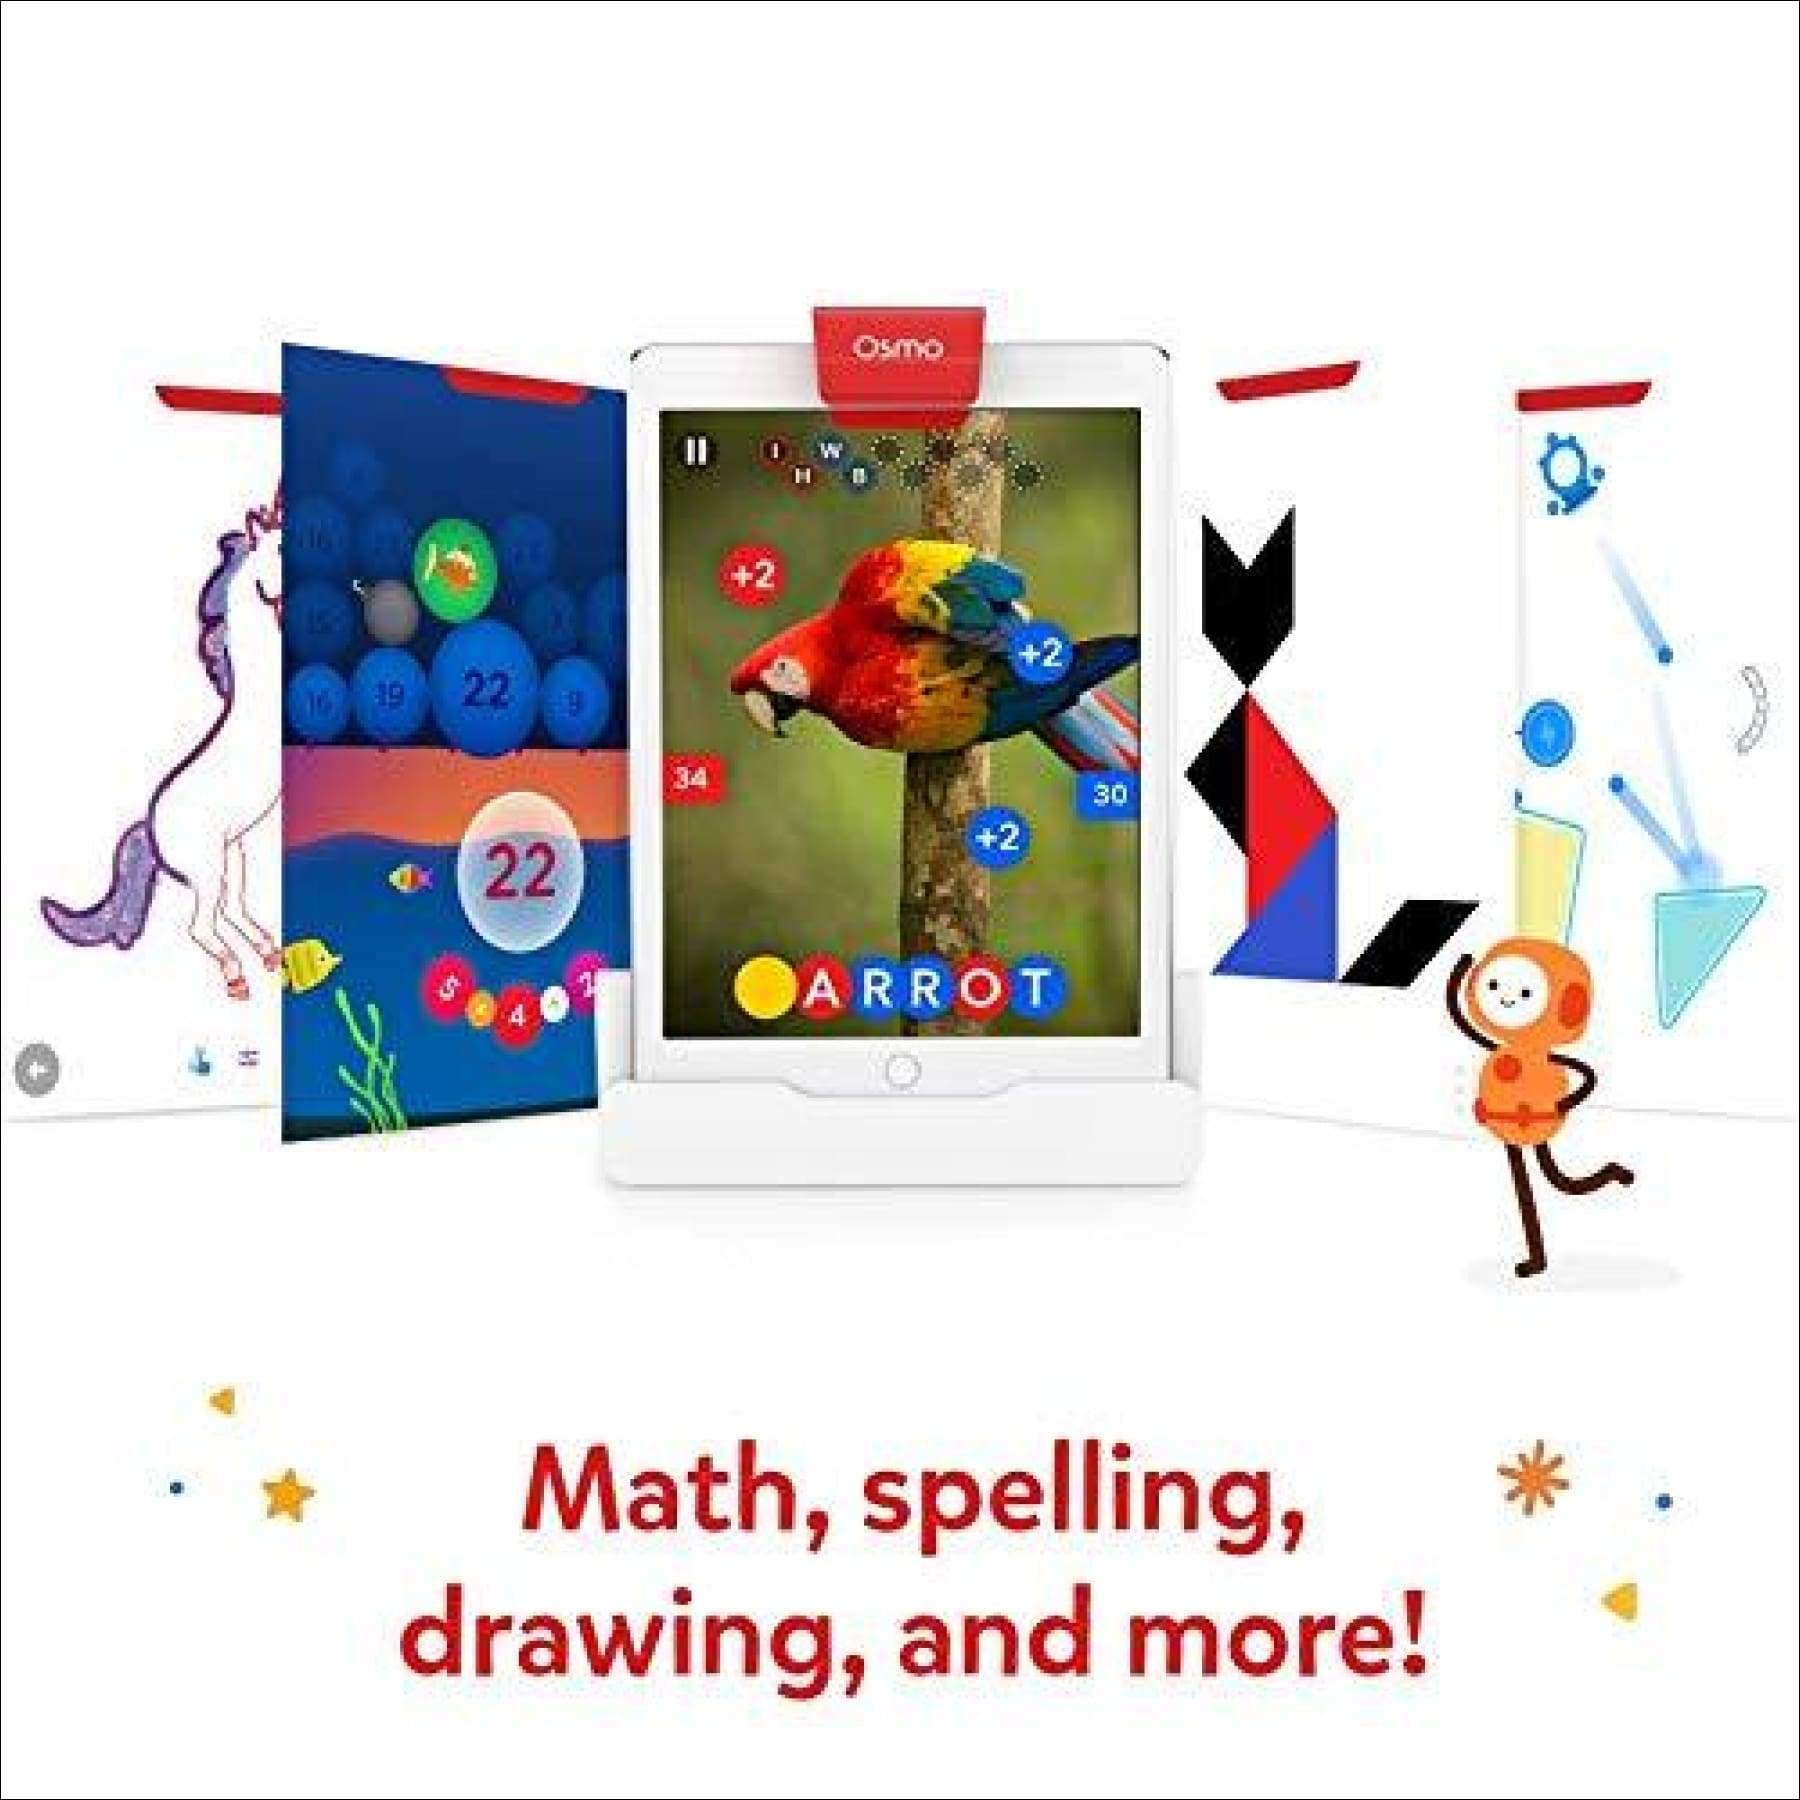 Osmo - Genius Starter Kit for iPad - 5 Hands-On Learning Games - STEM - Ages 6-10 - image 4 of 11